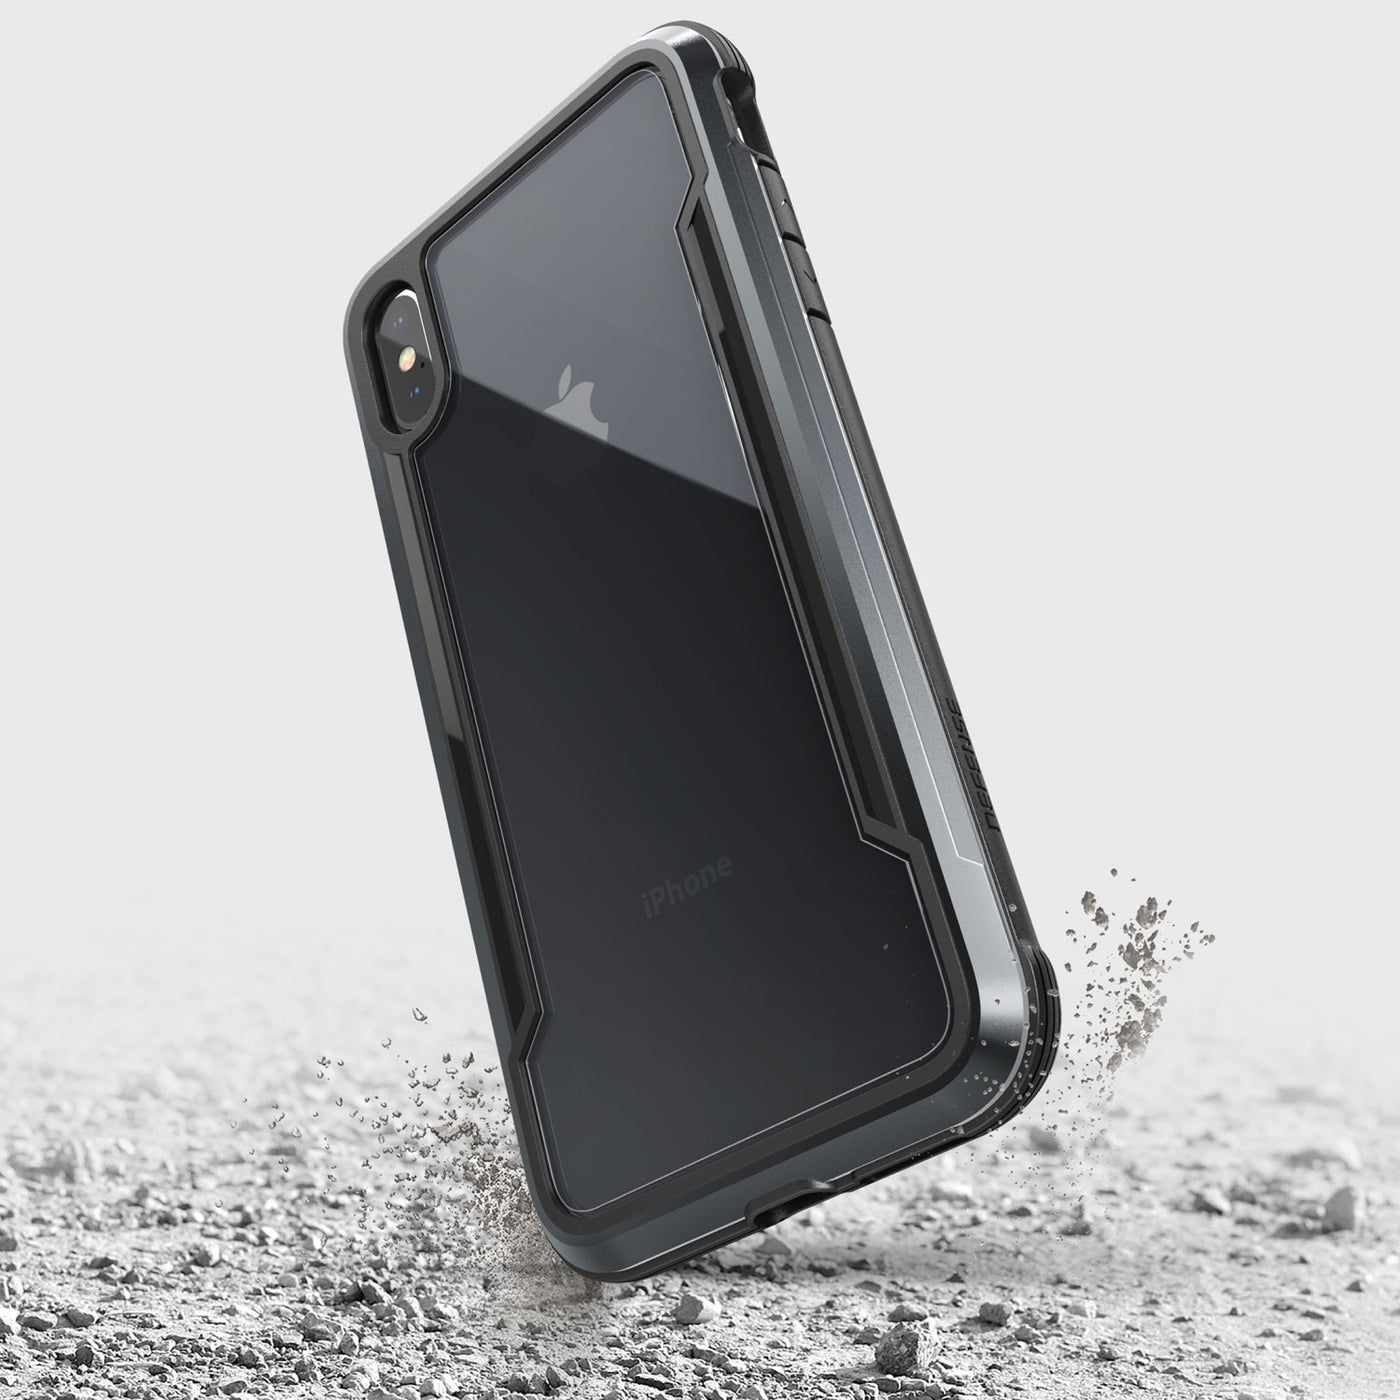 Rugged Case for iPhone XS Max. Raptic Shield in black.